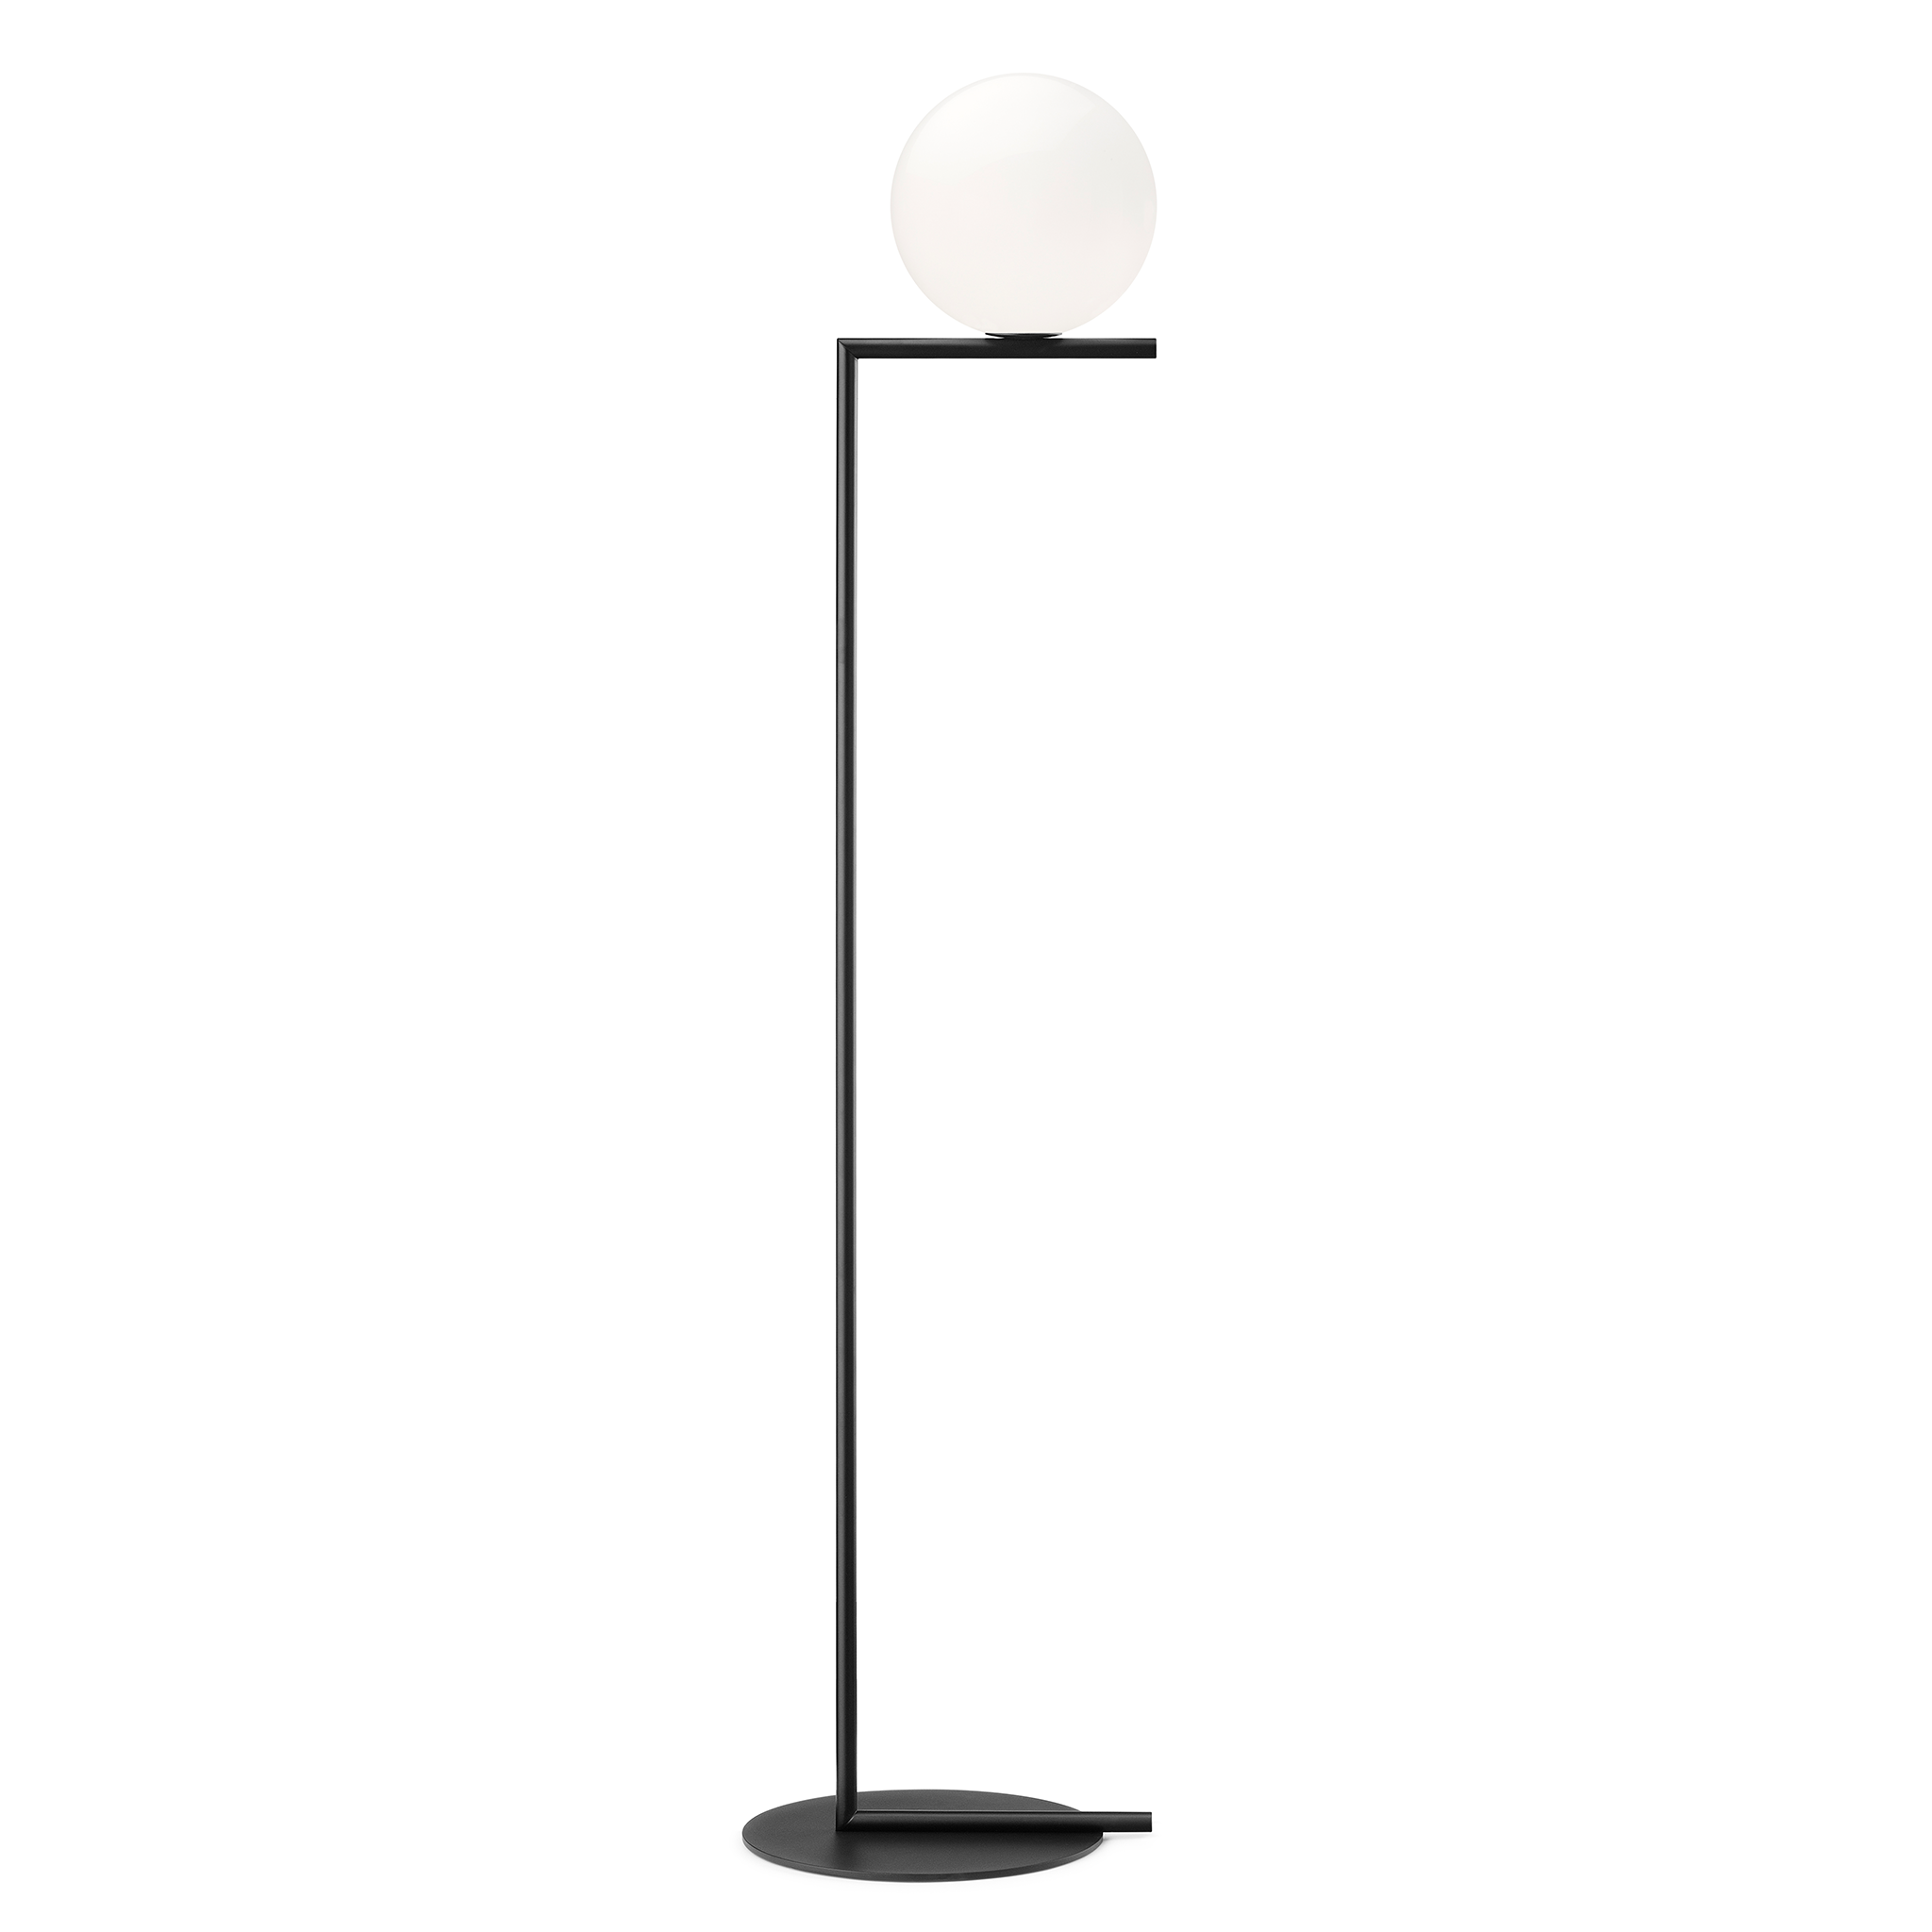 IC Floor Lamp F1 / black by Michael Anastassiades for Flos - Clearance